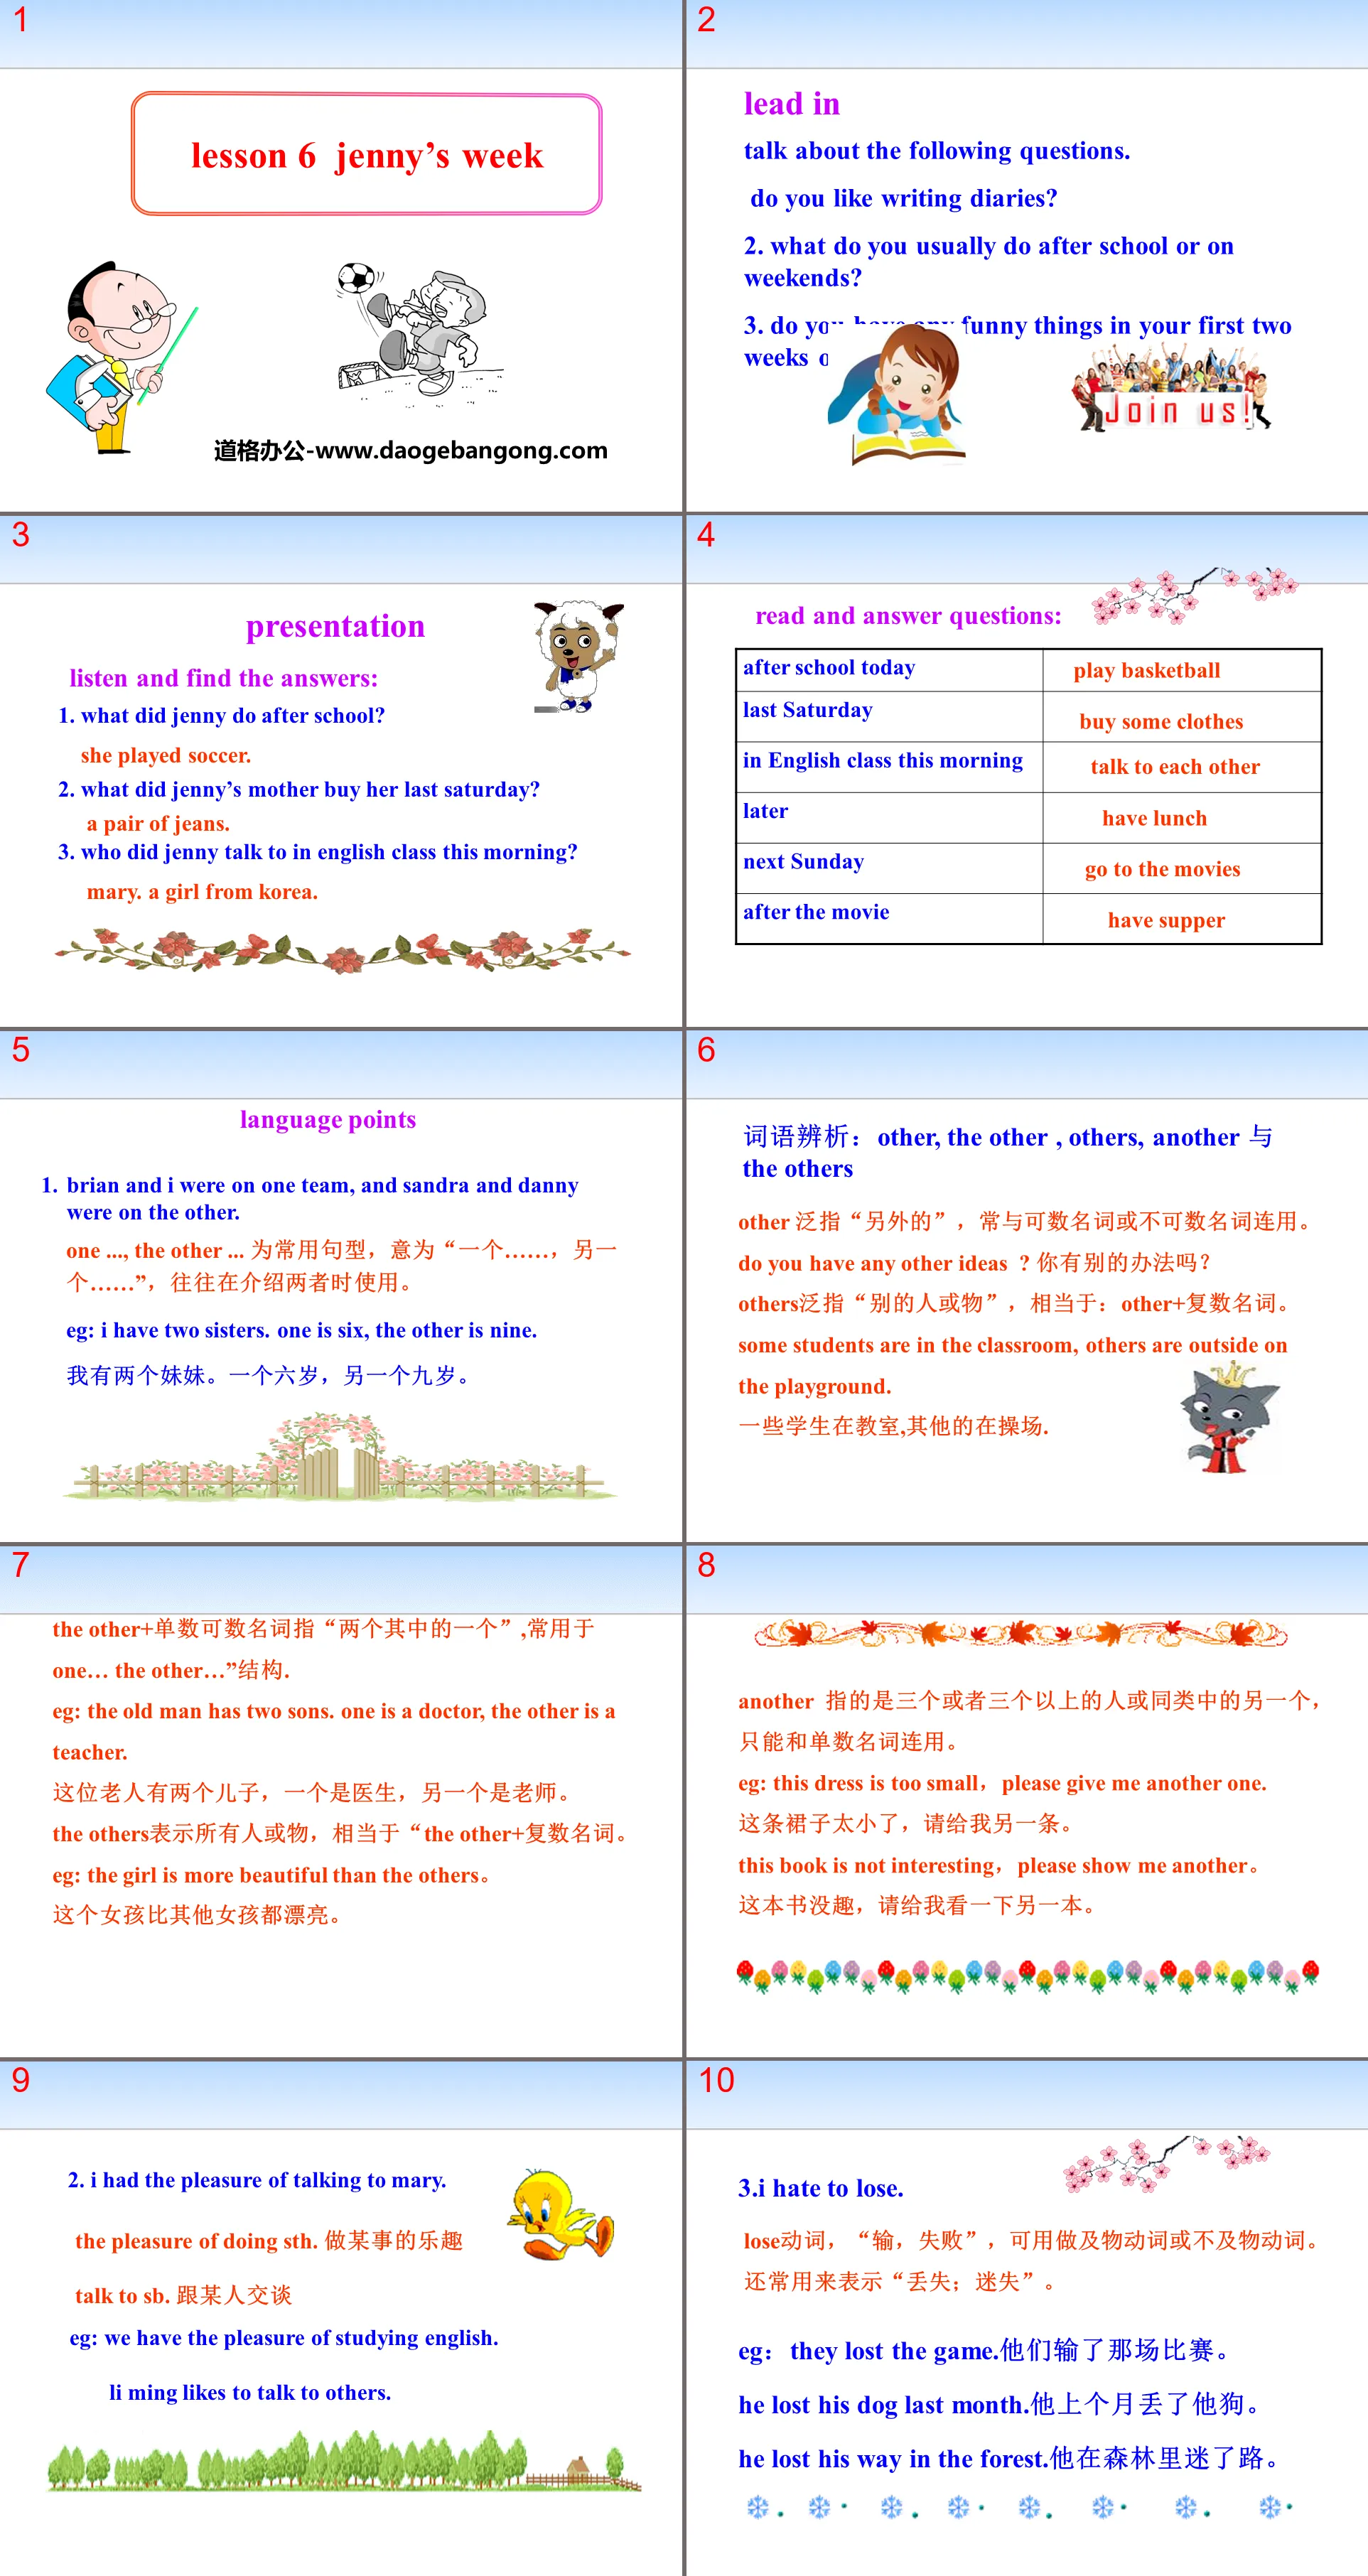 《Jenny's Week》Me and My Class PPT下载
